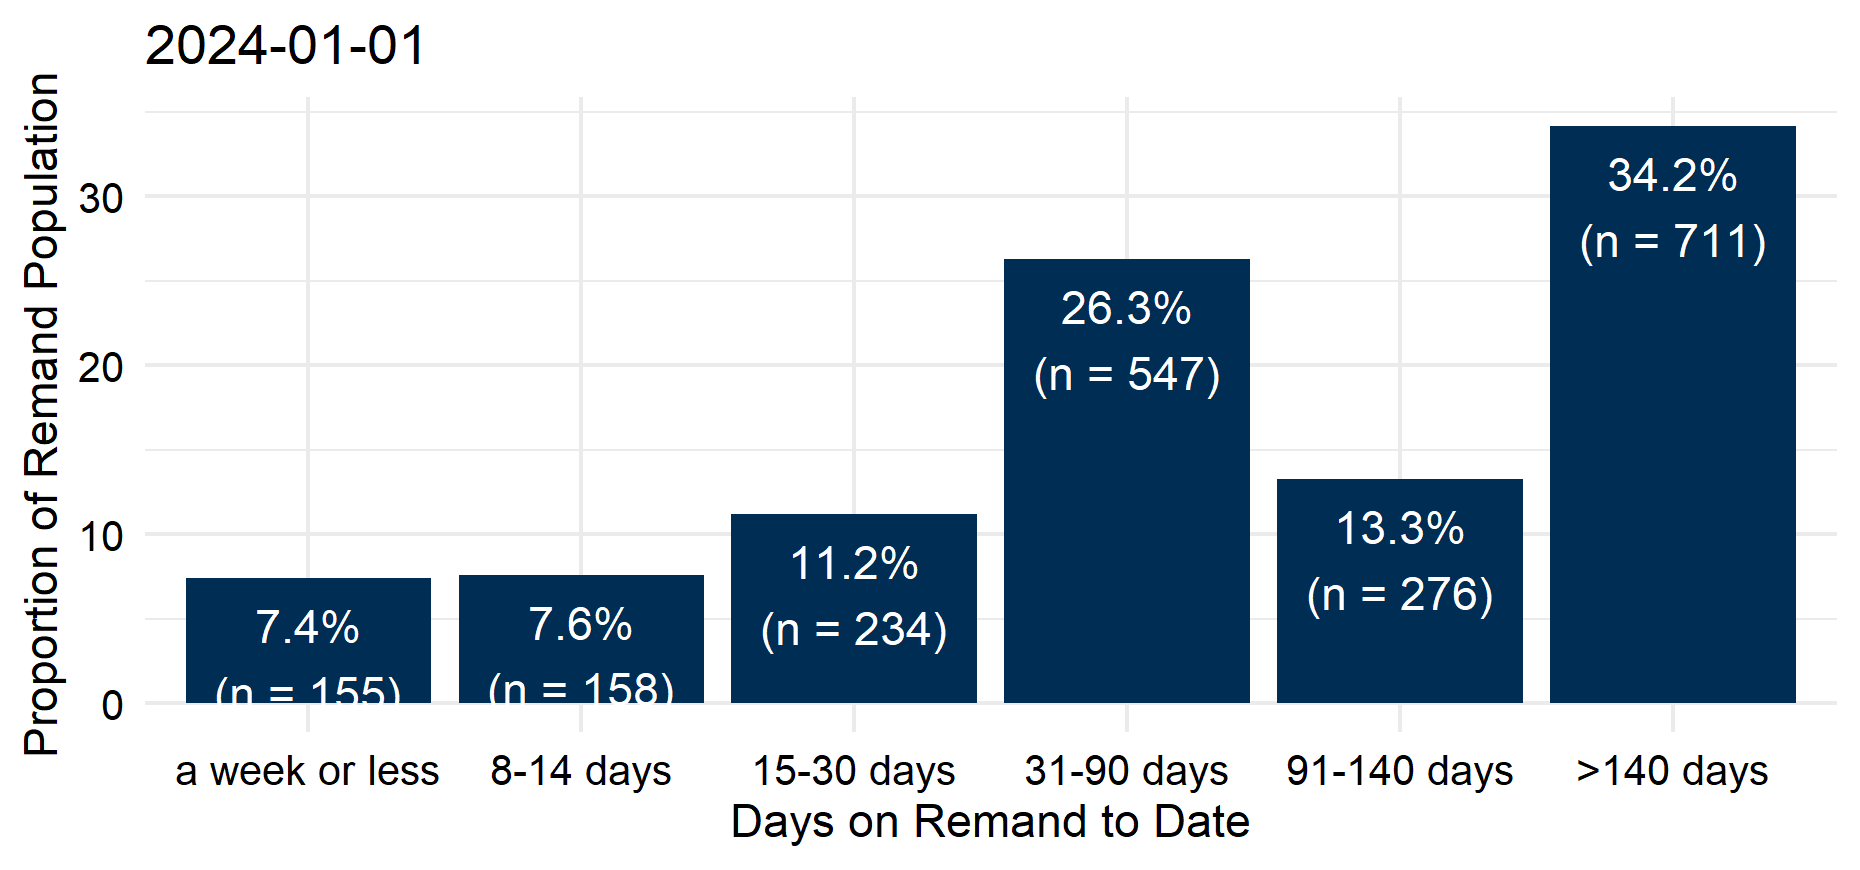 The groupings of time on remand to date for people on remand on the morning of the 1st January. The largest proportion – 34% or 711 people - had been there for over 140 days. 26% (547 people) had been on remand for 31 to 90 days. 13% (276 people) for 91 to 140 days. The remaining 547 (26%) had been on remand for 30 days or less. Last updated January 2024. Next update due February 2024.